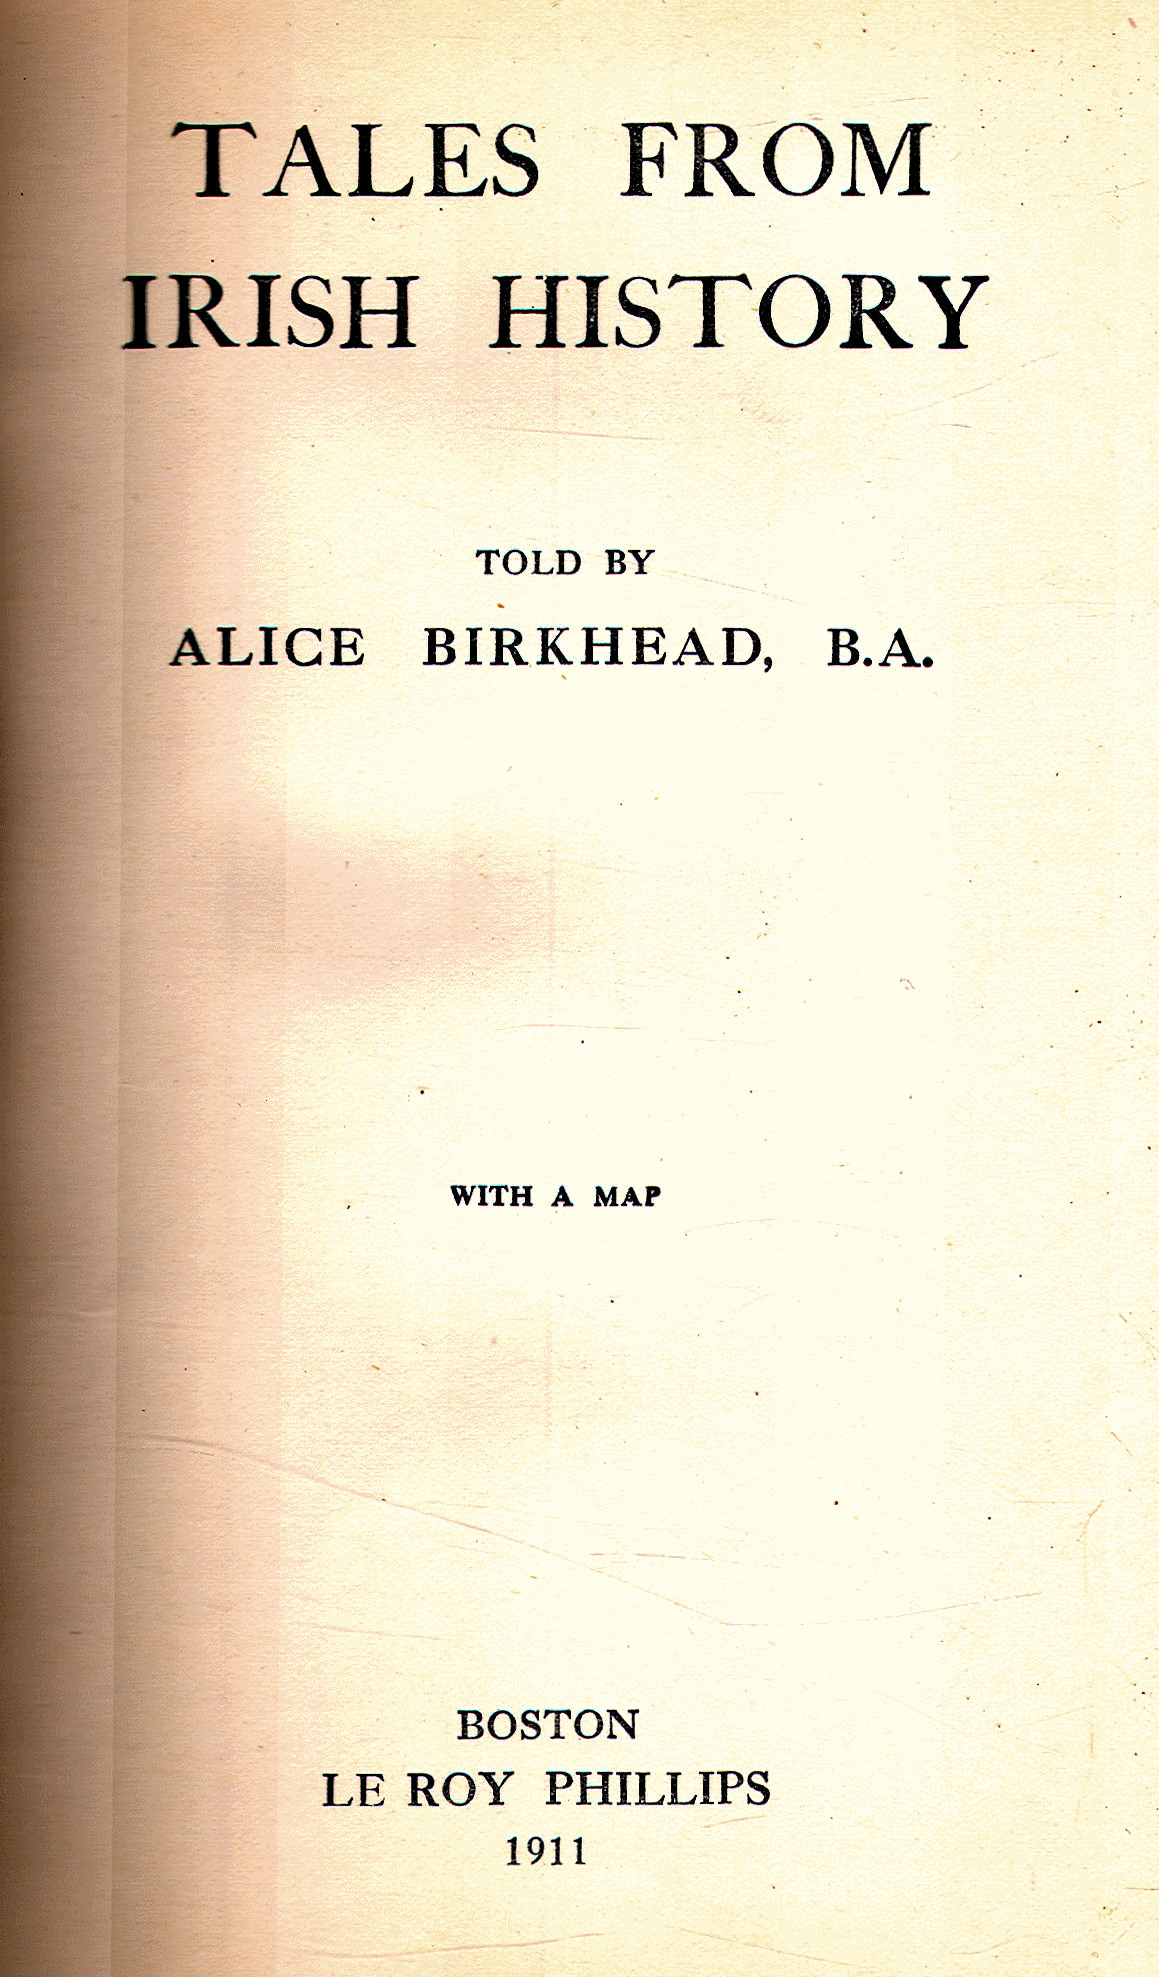 [Title Page] from Tales from Irish History by Alice Birkhead